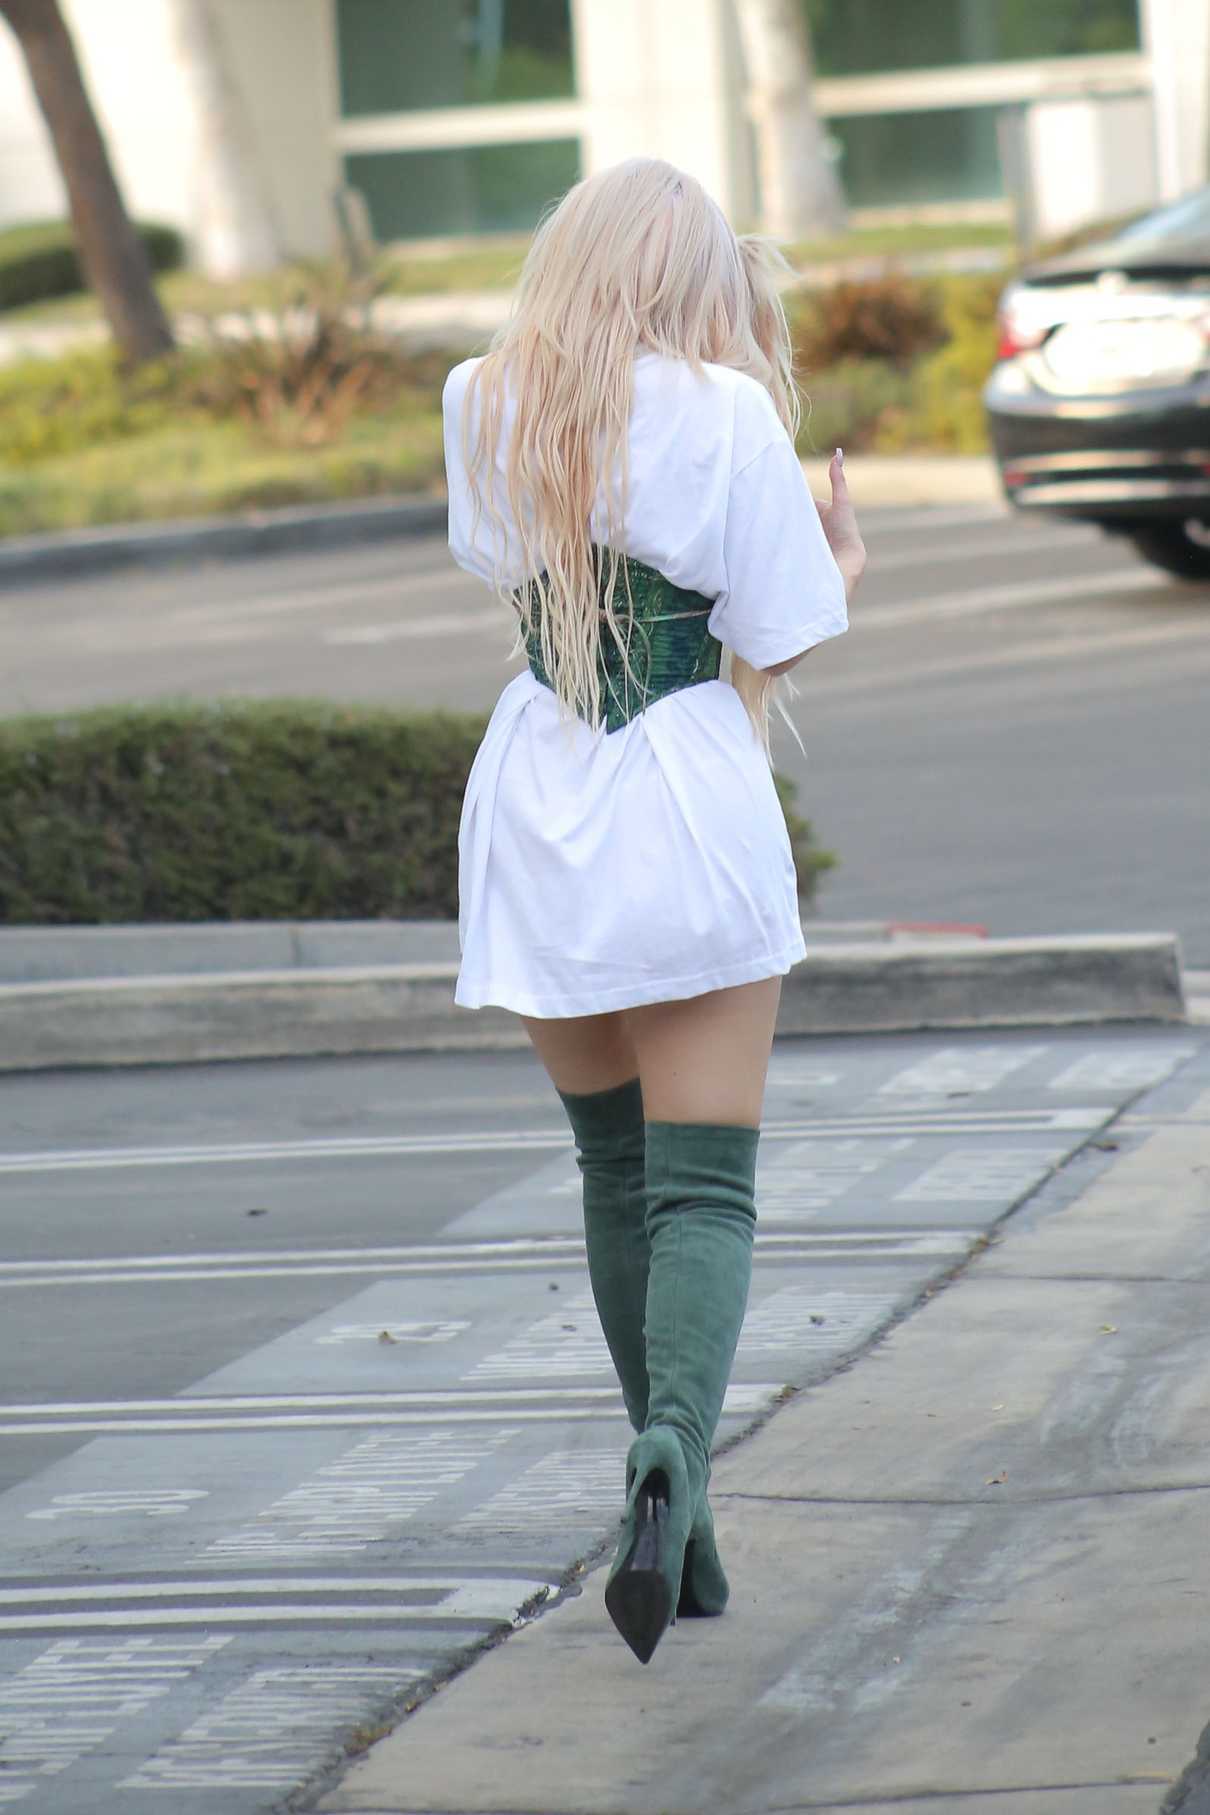 Kylie Jenner Leaves an Office Meeting in a Corset and Green Boots in LA ...